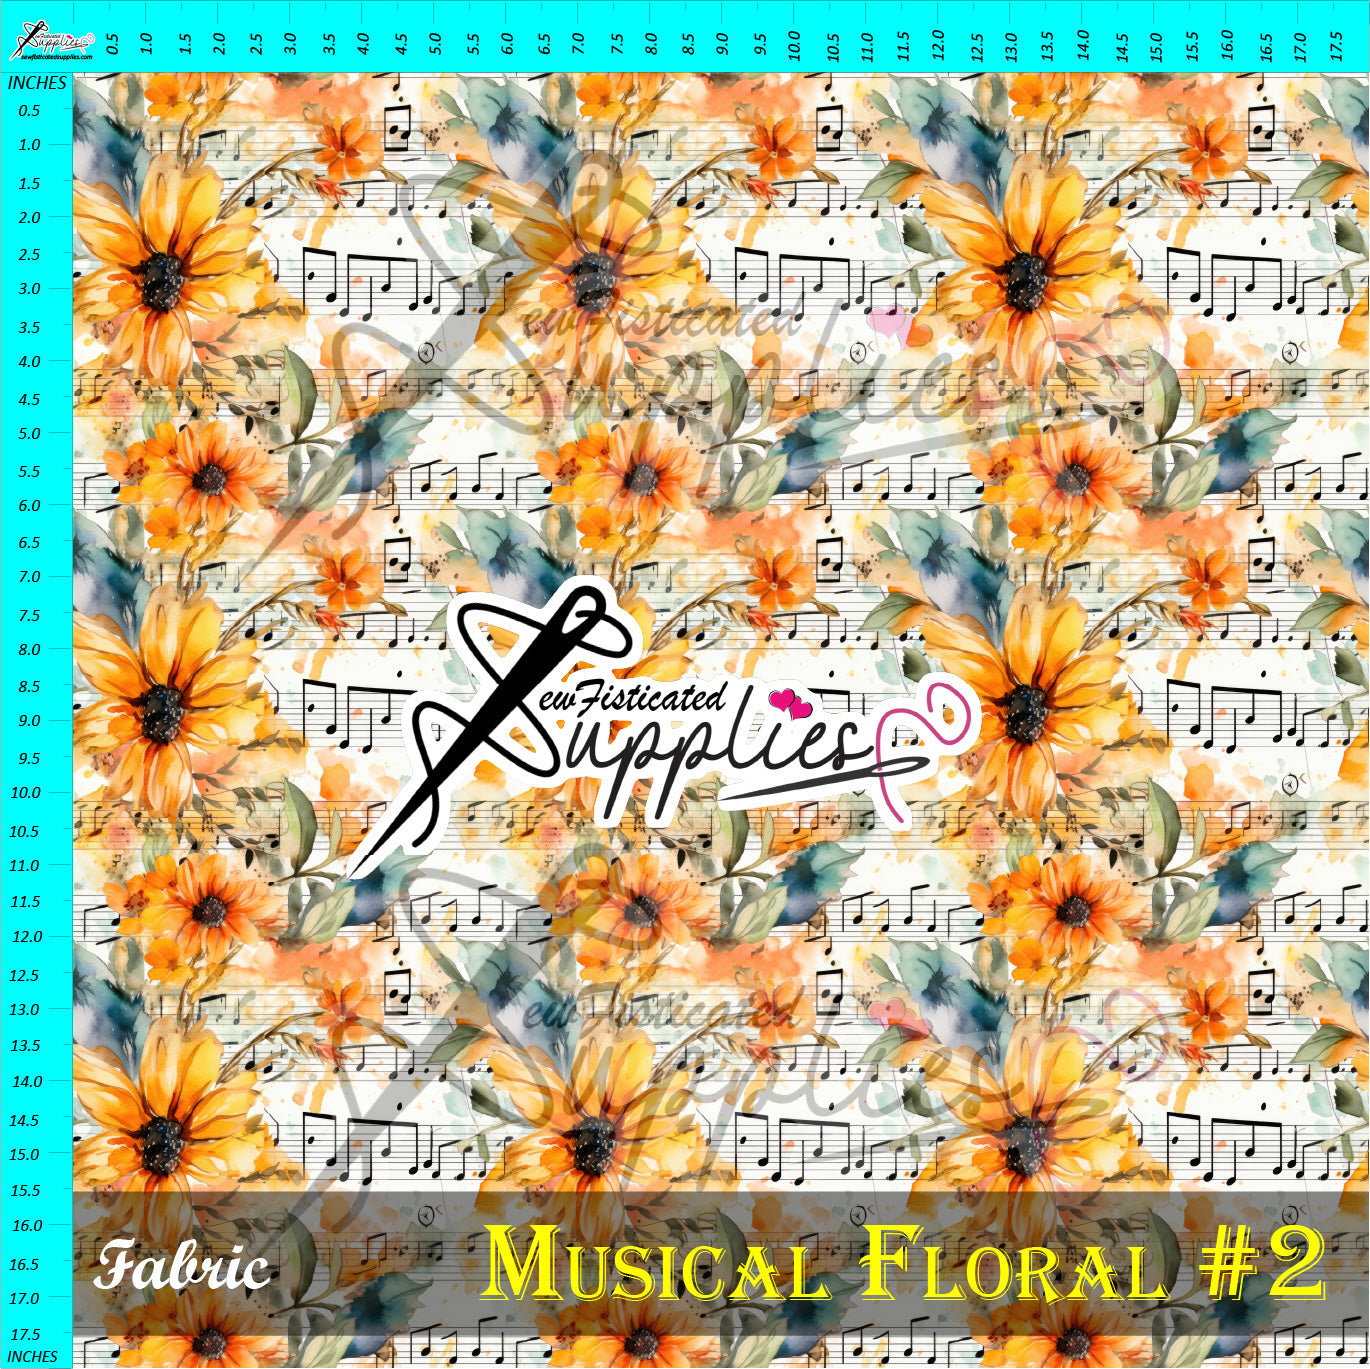 Musical Floral